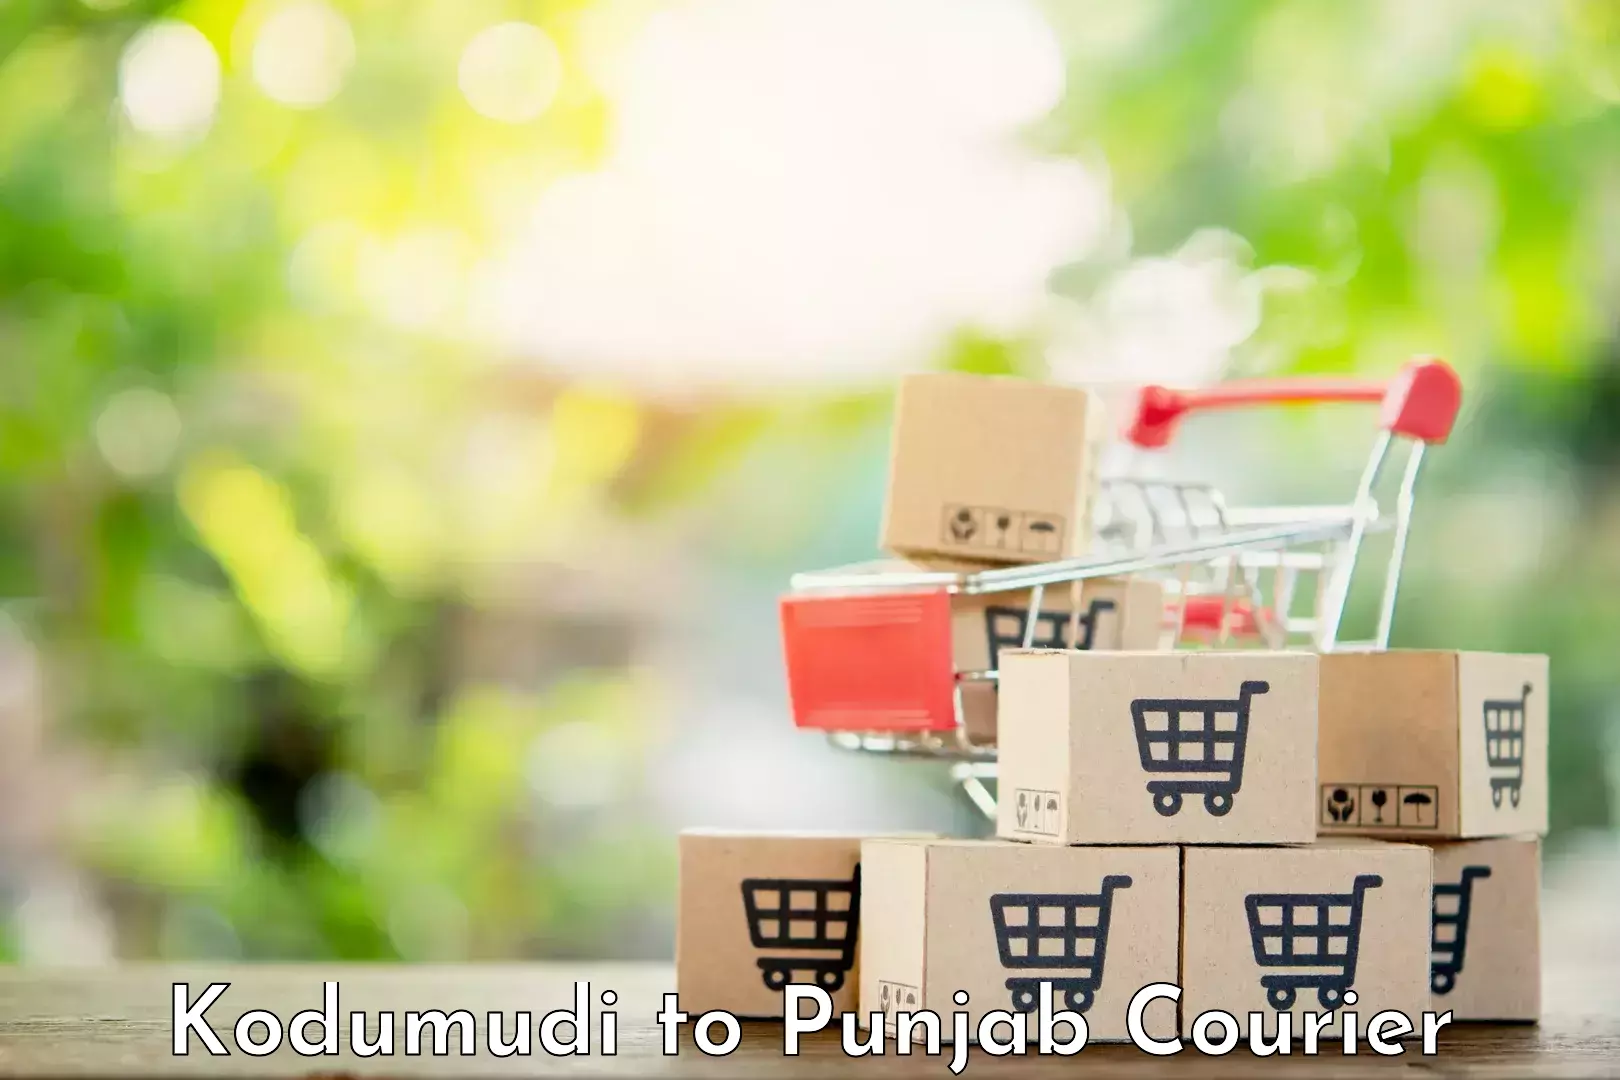 Customer-oriented courier services Kodumudi to Mohali